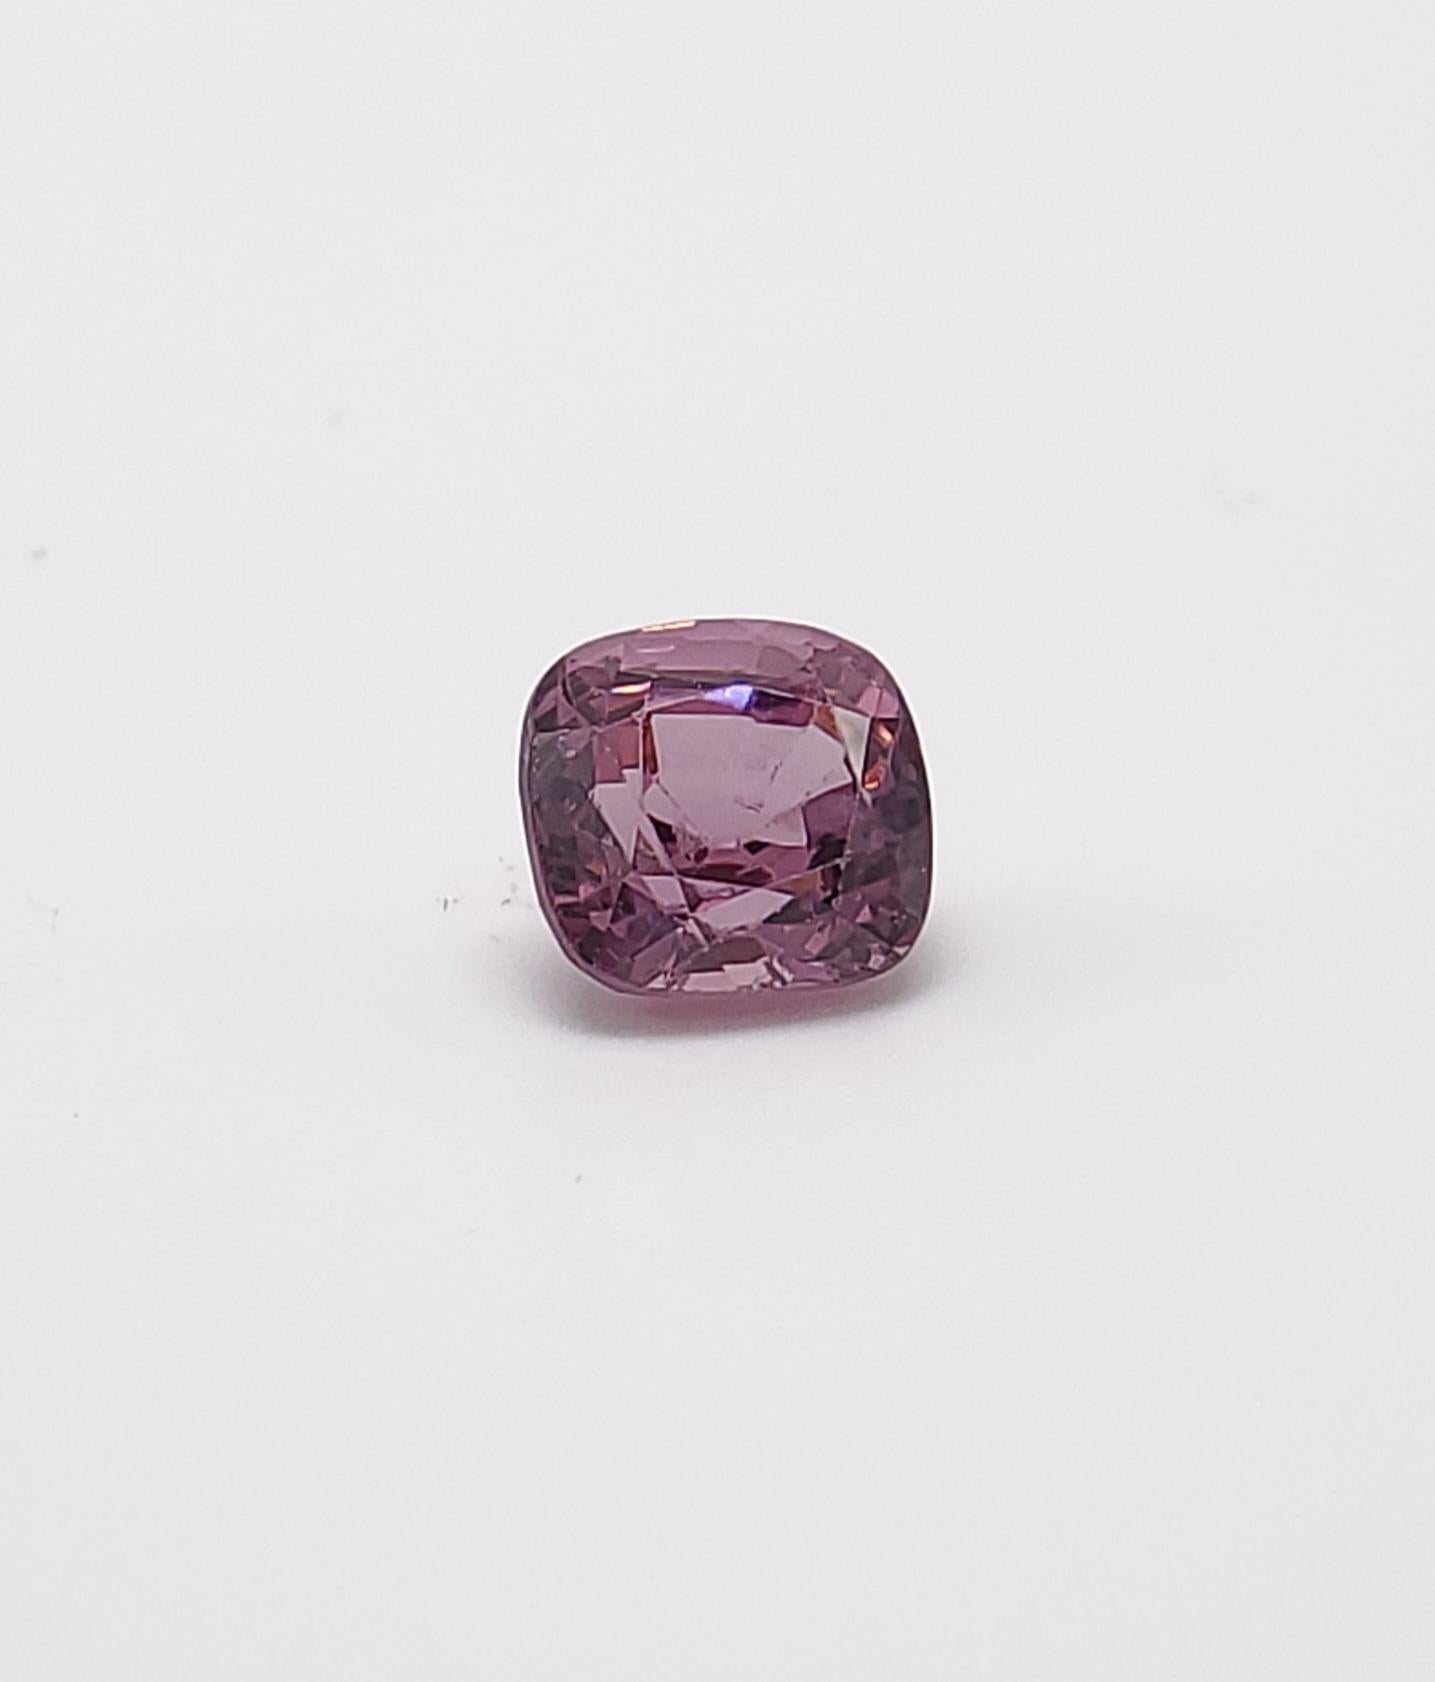 Cushion Cut GIA Certified 1.79 Carat Spinel For Sale